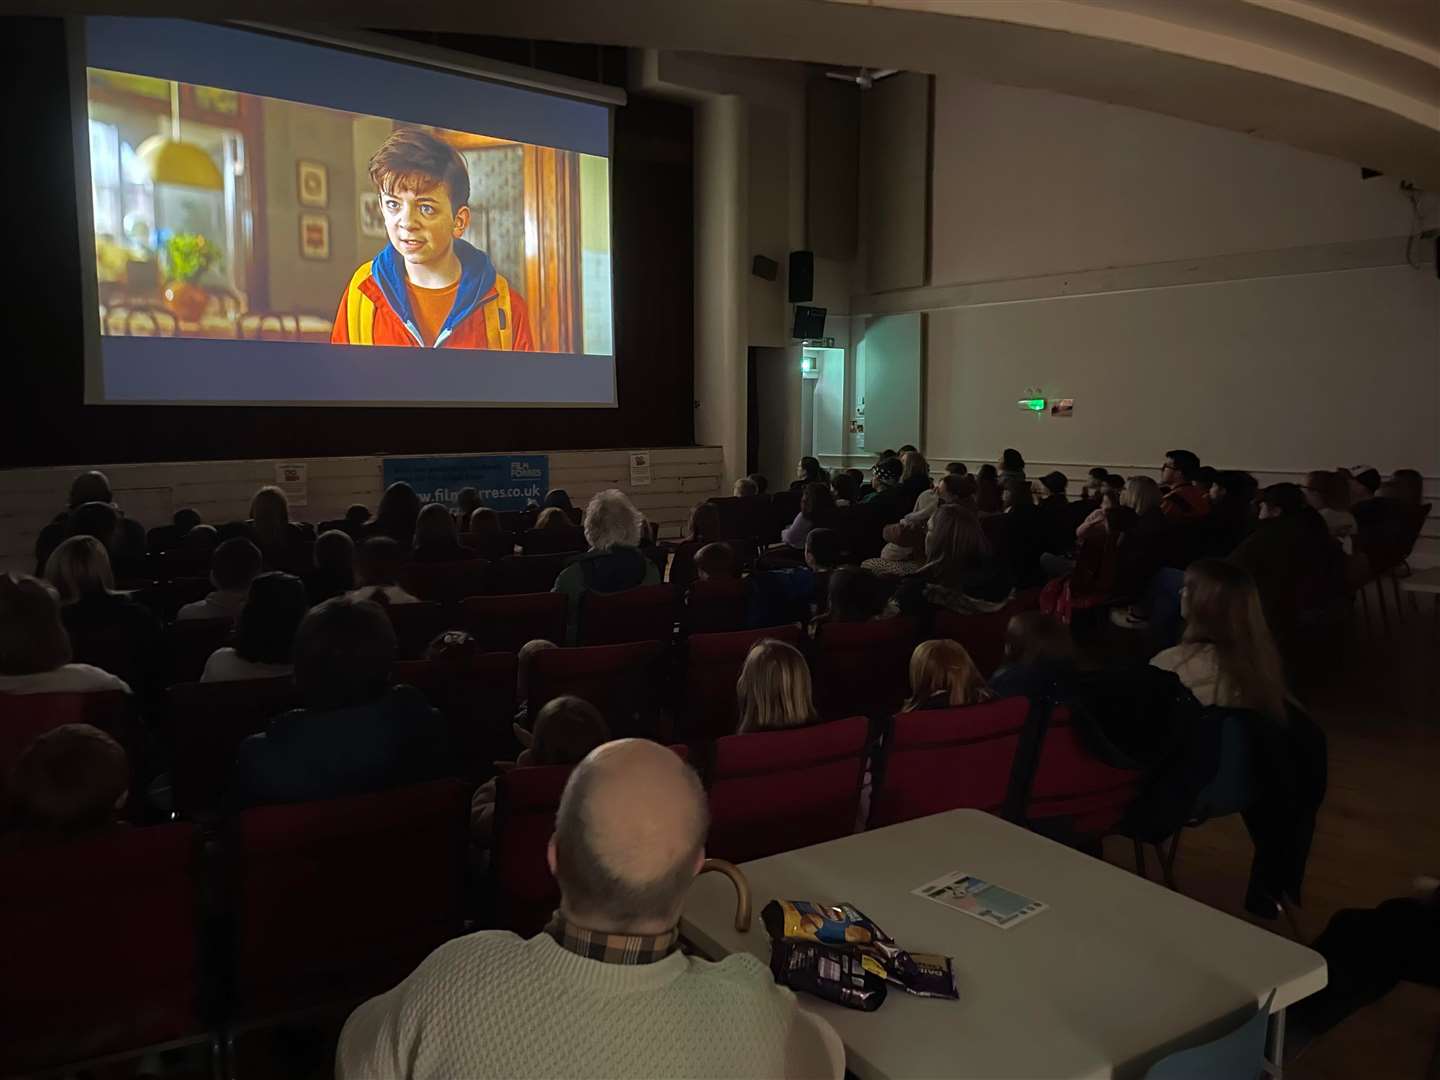 Forres Town Hall was packed for the Forres Skate Park Initiative fundraising film night.